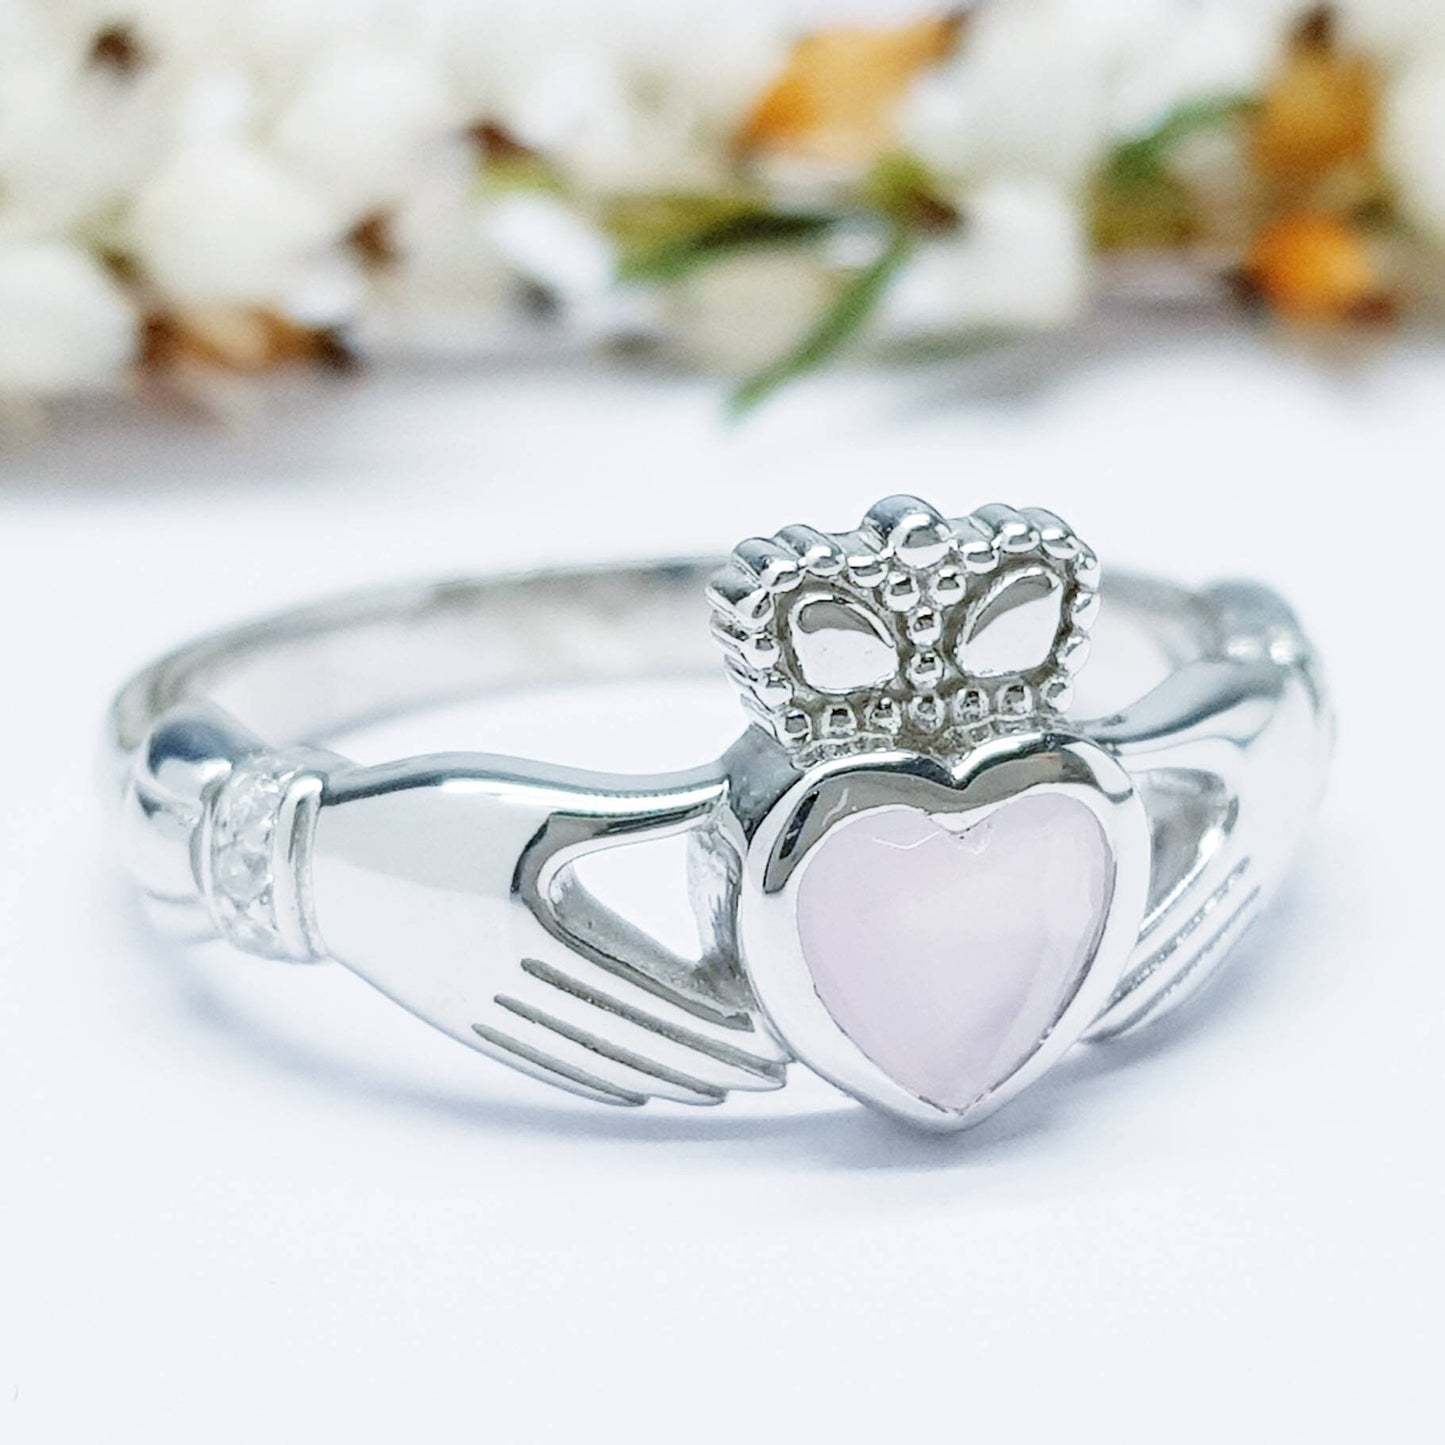 Irish Claddagh ring set with pink heart shaped stone from Galway, Ireland